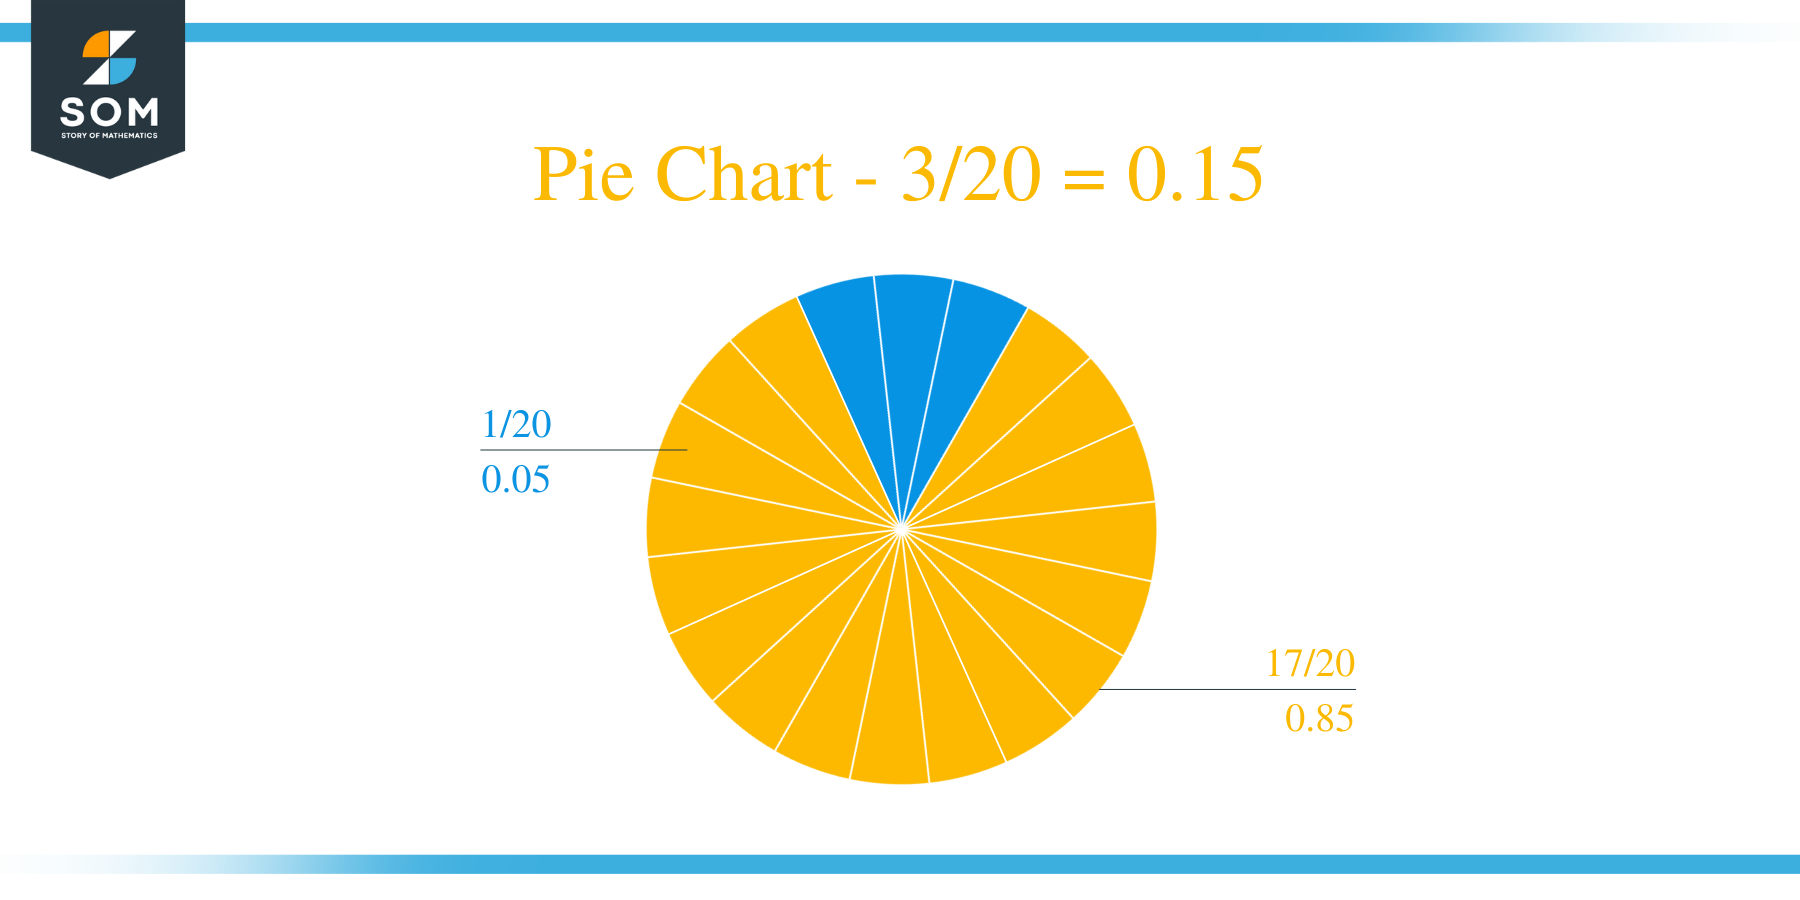 Pie Chart 3 by 20 Long Division Method